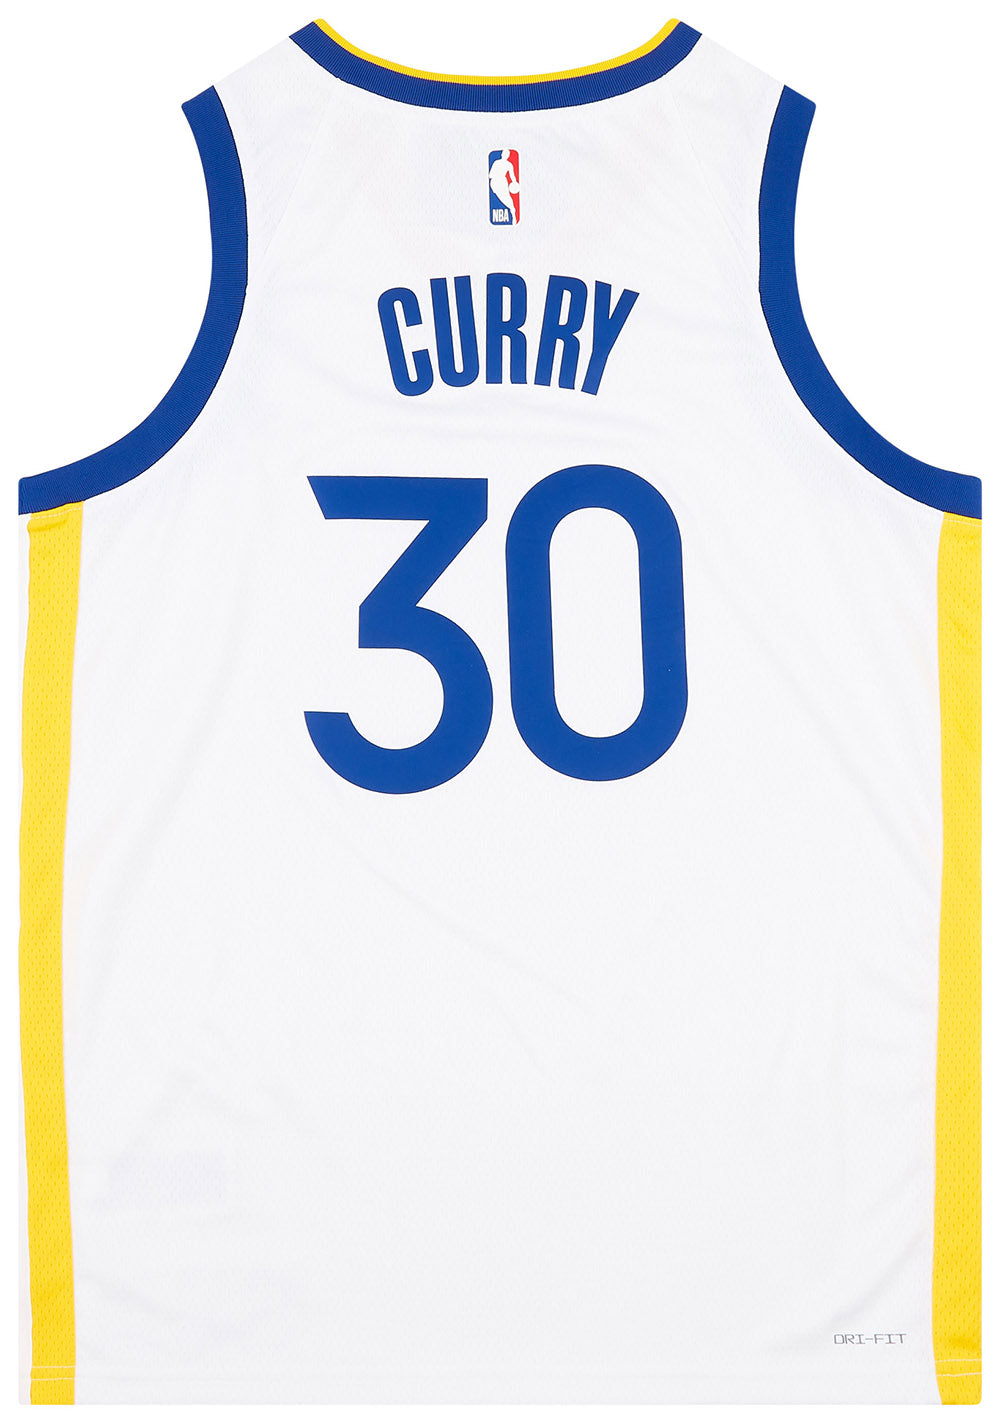 2017-21 GOLDEN STATE WARRIORS CURRY #30 NIKE SWINGMAN JERSEY (HOME) L - W/TAGS